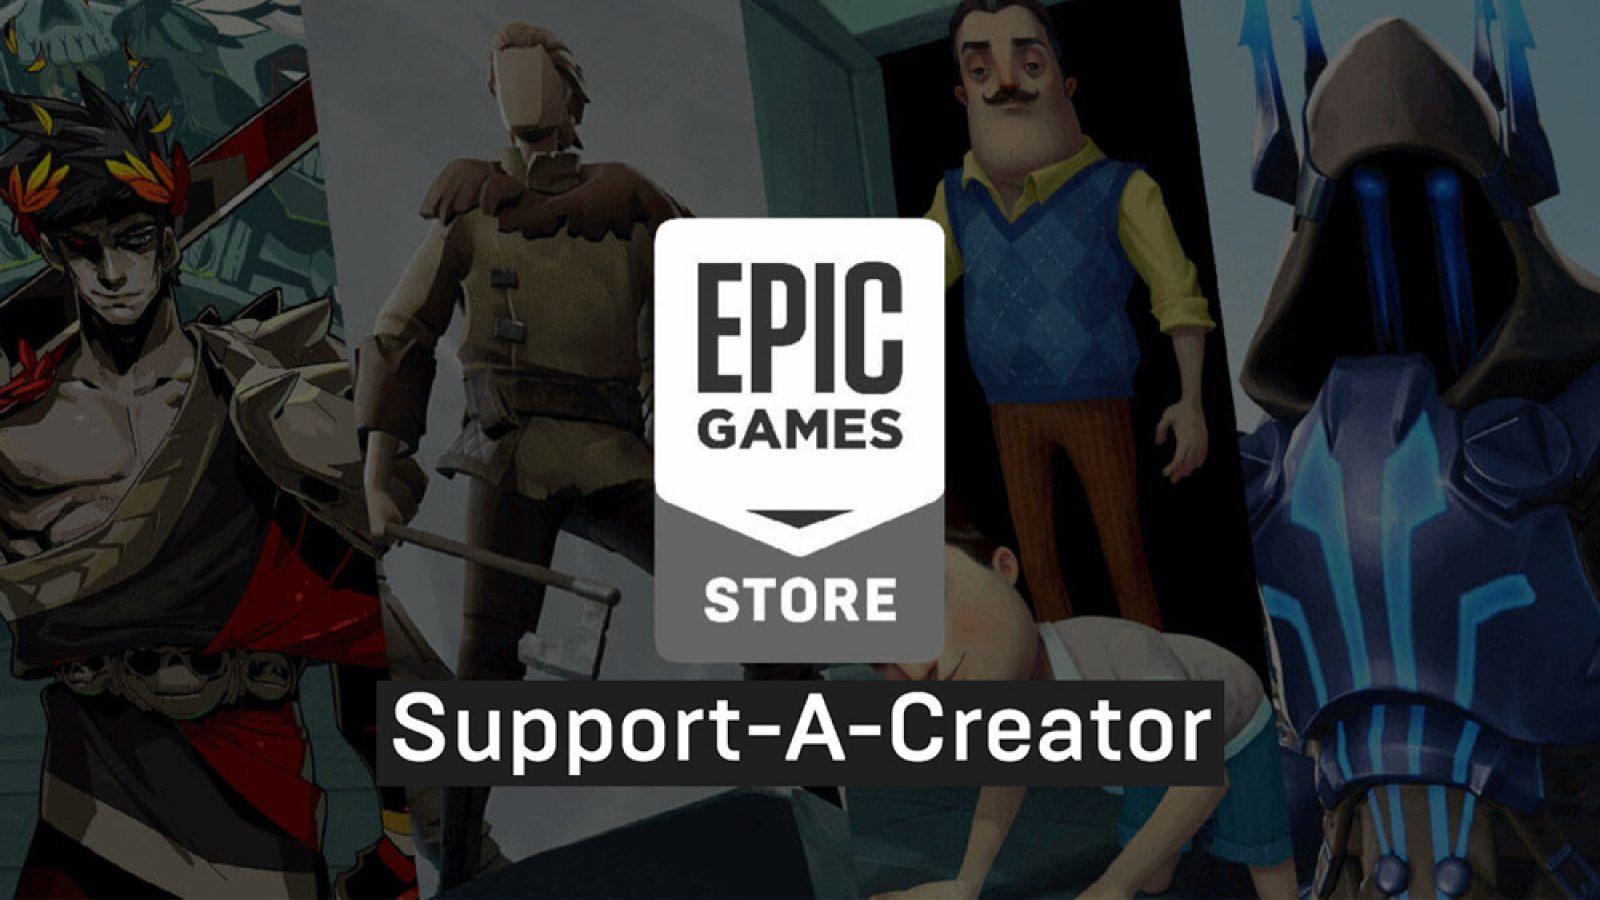 How To Get Published On The Epic Games Store